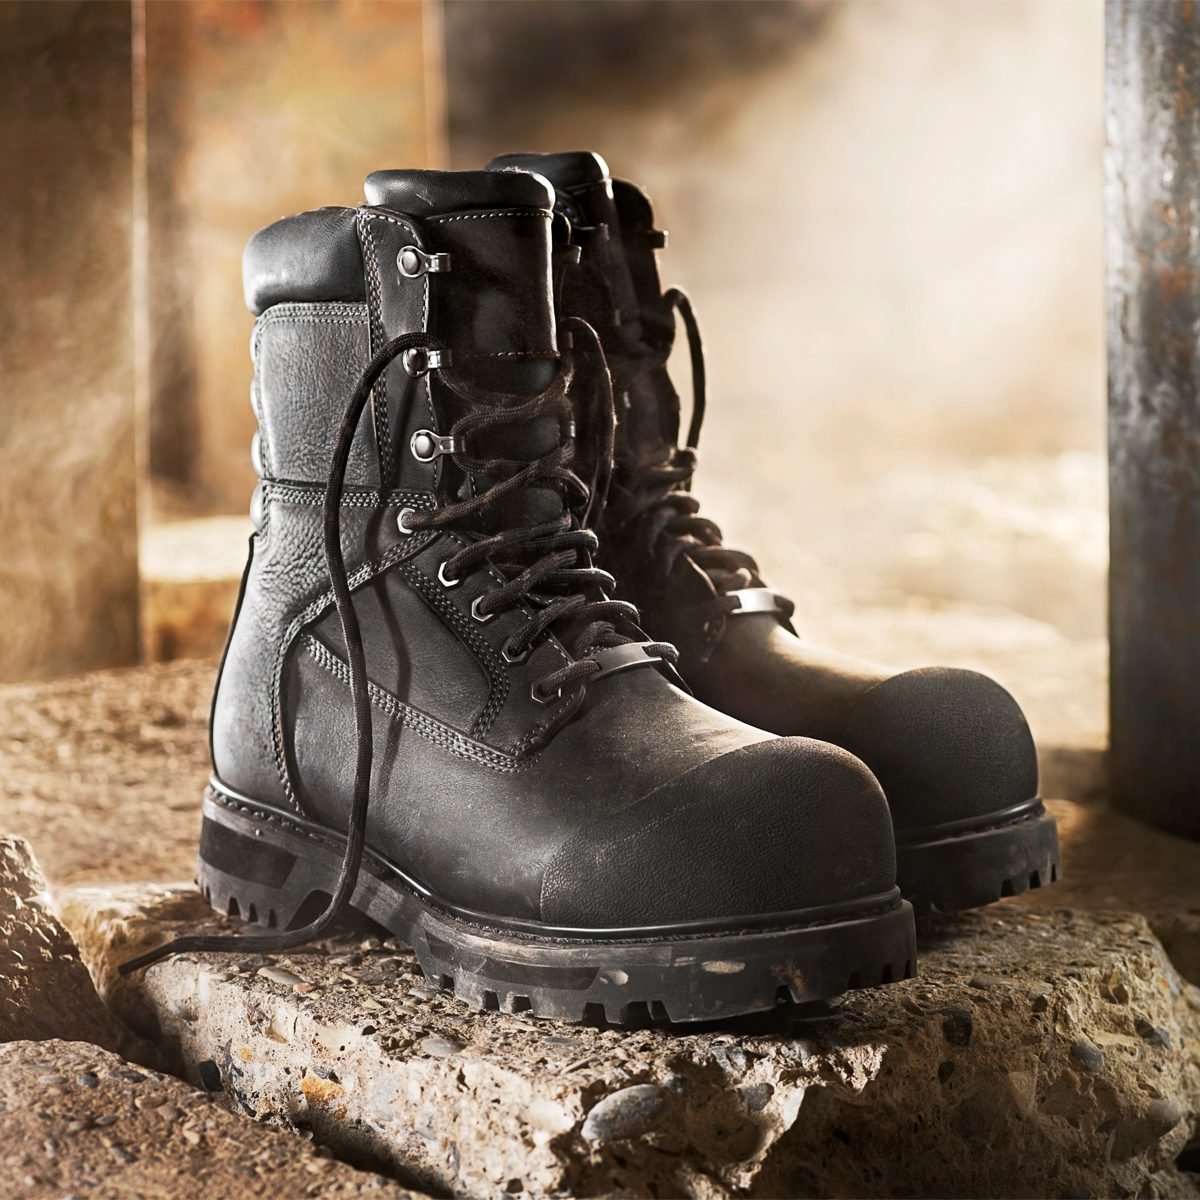 Tough and Durable: Recommended Work Boots Built to Last